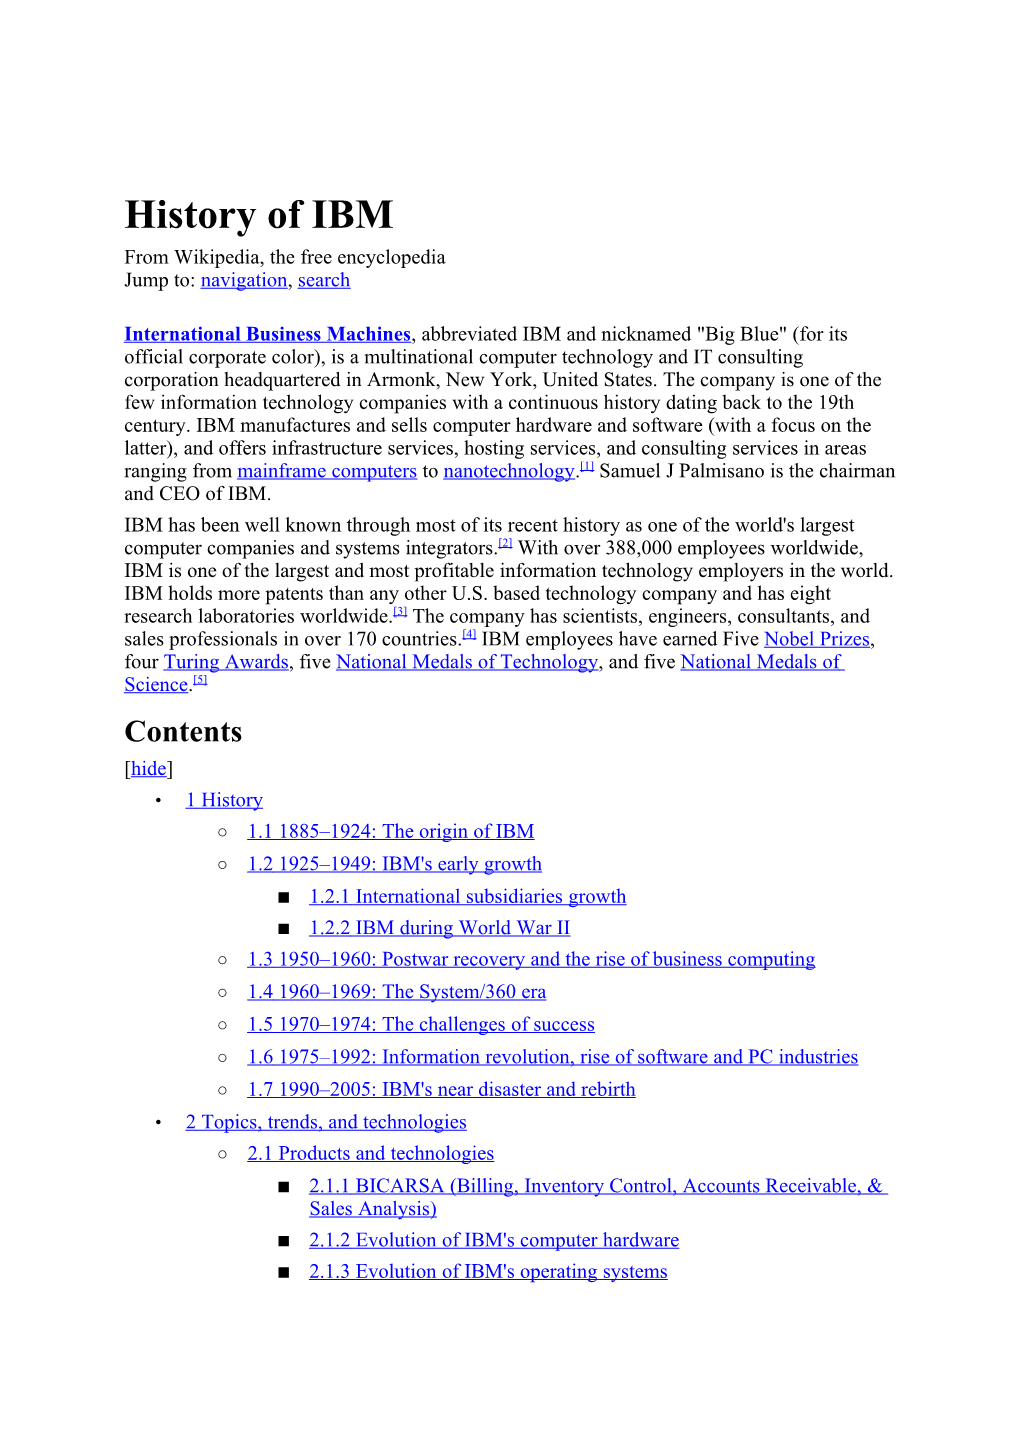 History of IBM from Wikipedia, the Free Encyclopedia Jump To: Navigation, Search